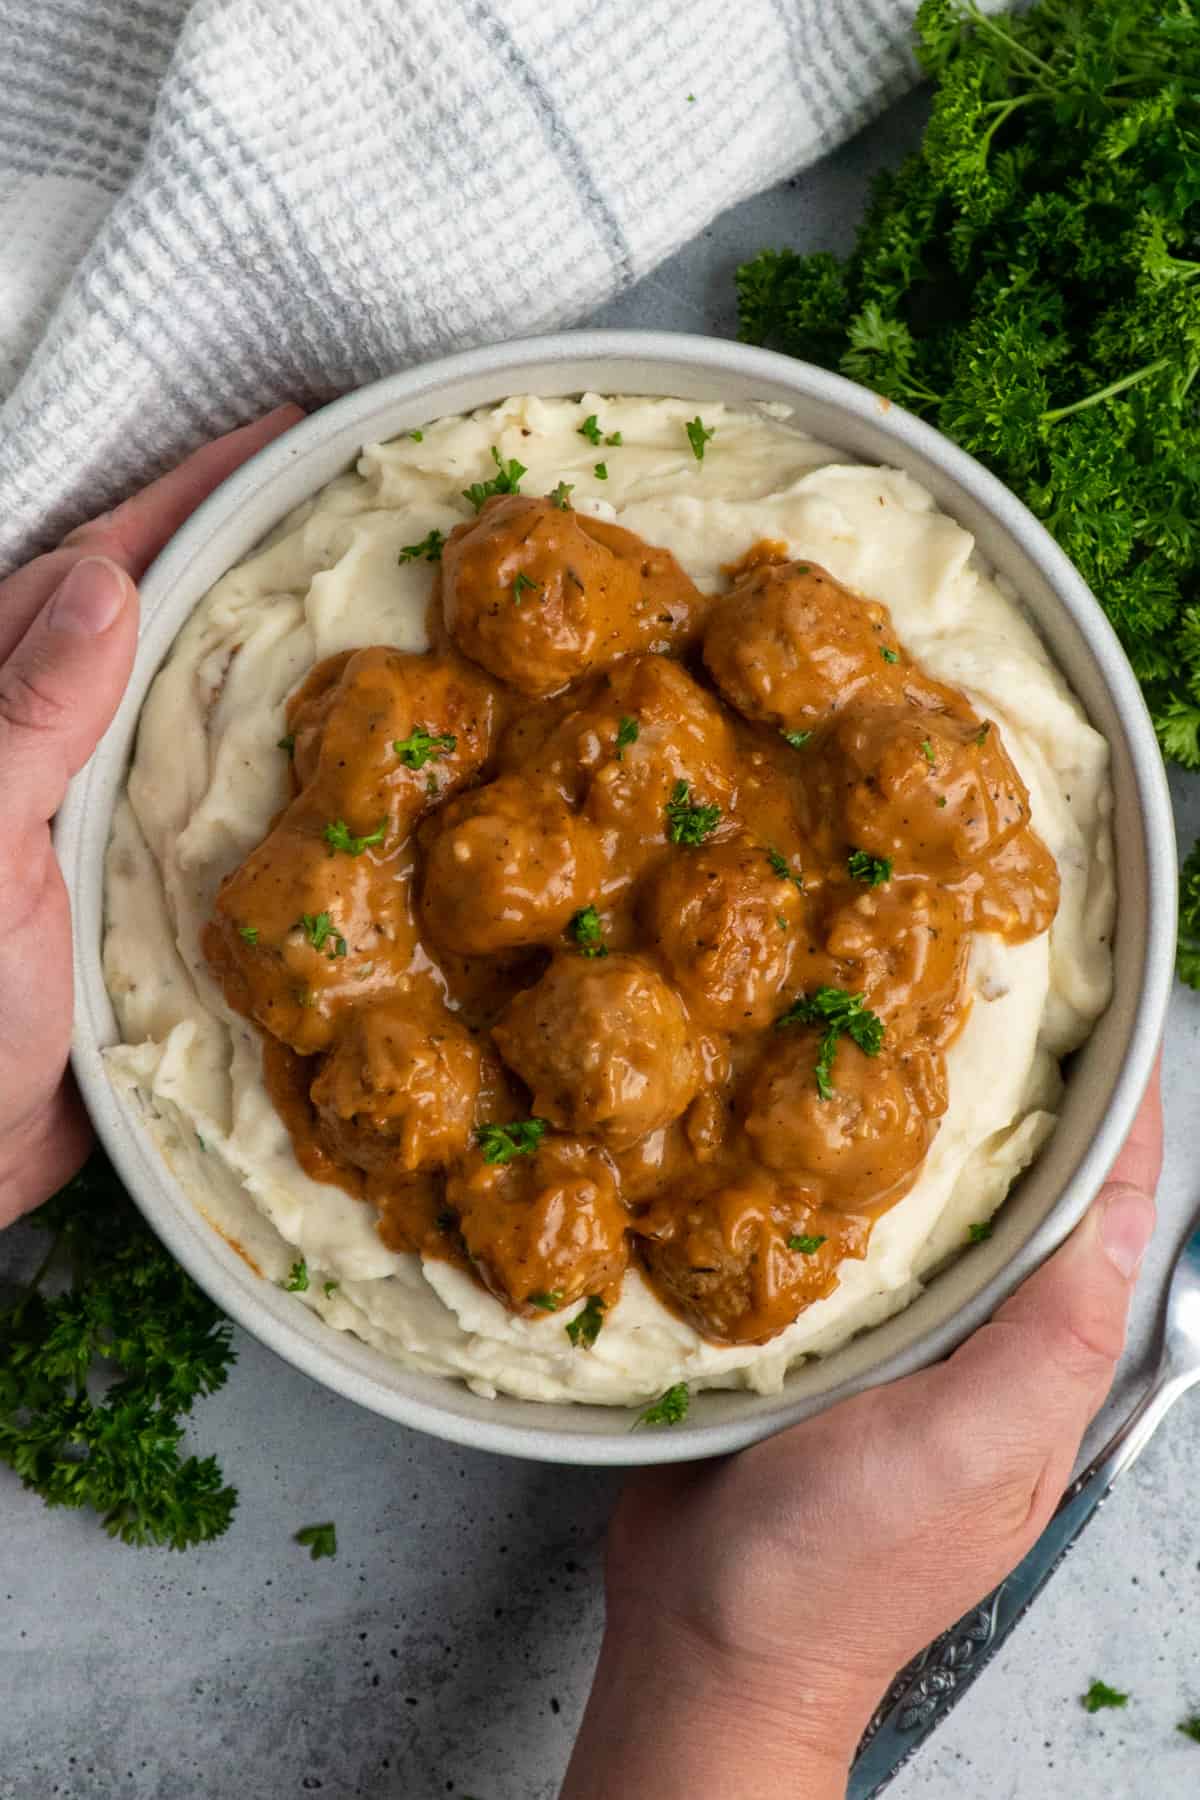 Hands holding a bowl of meatballs and gravy over mashed potatoes.